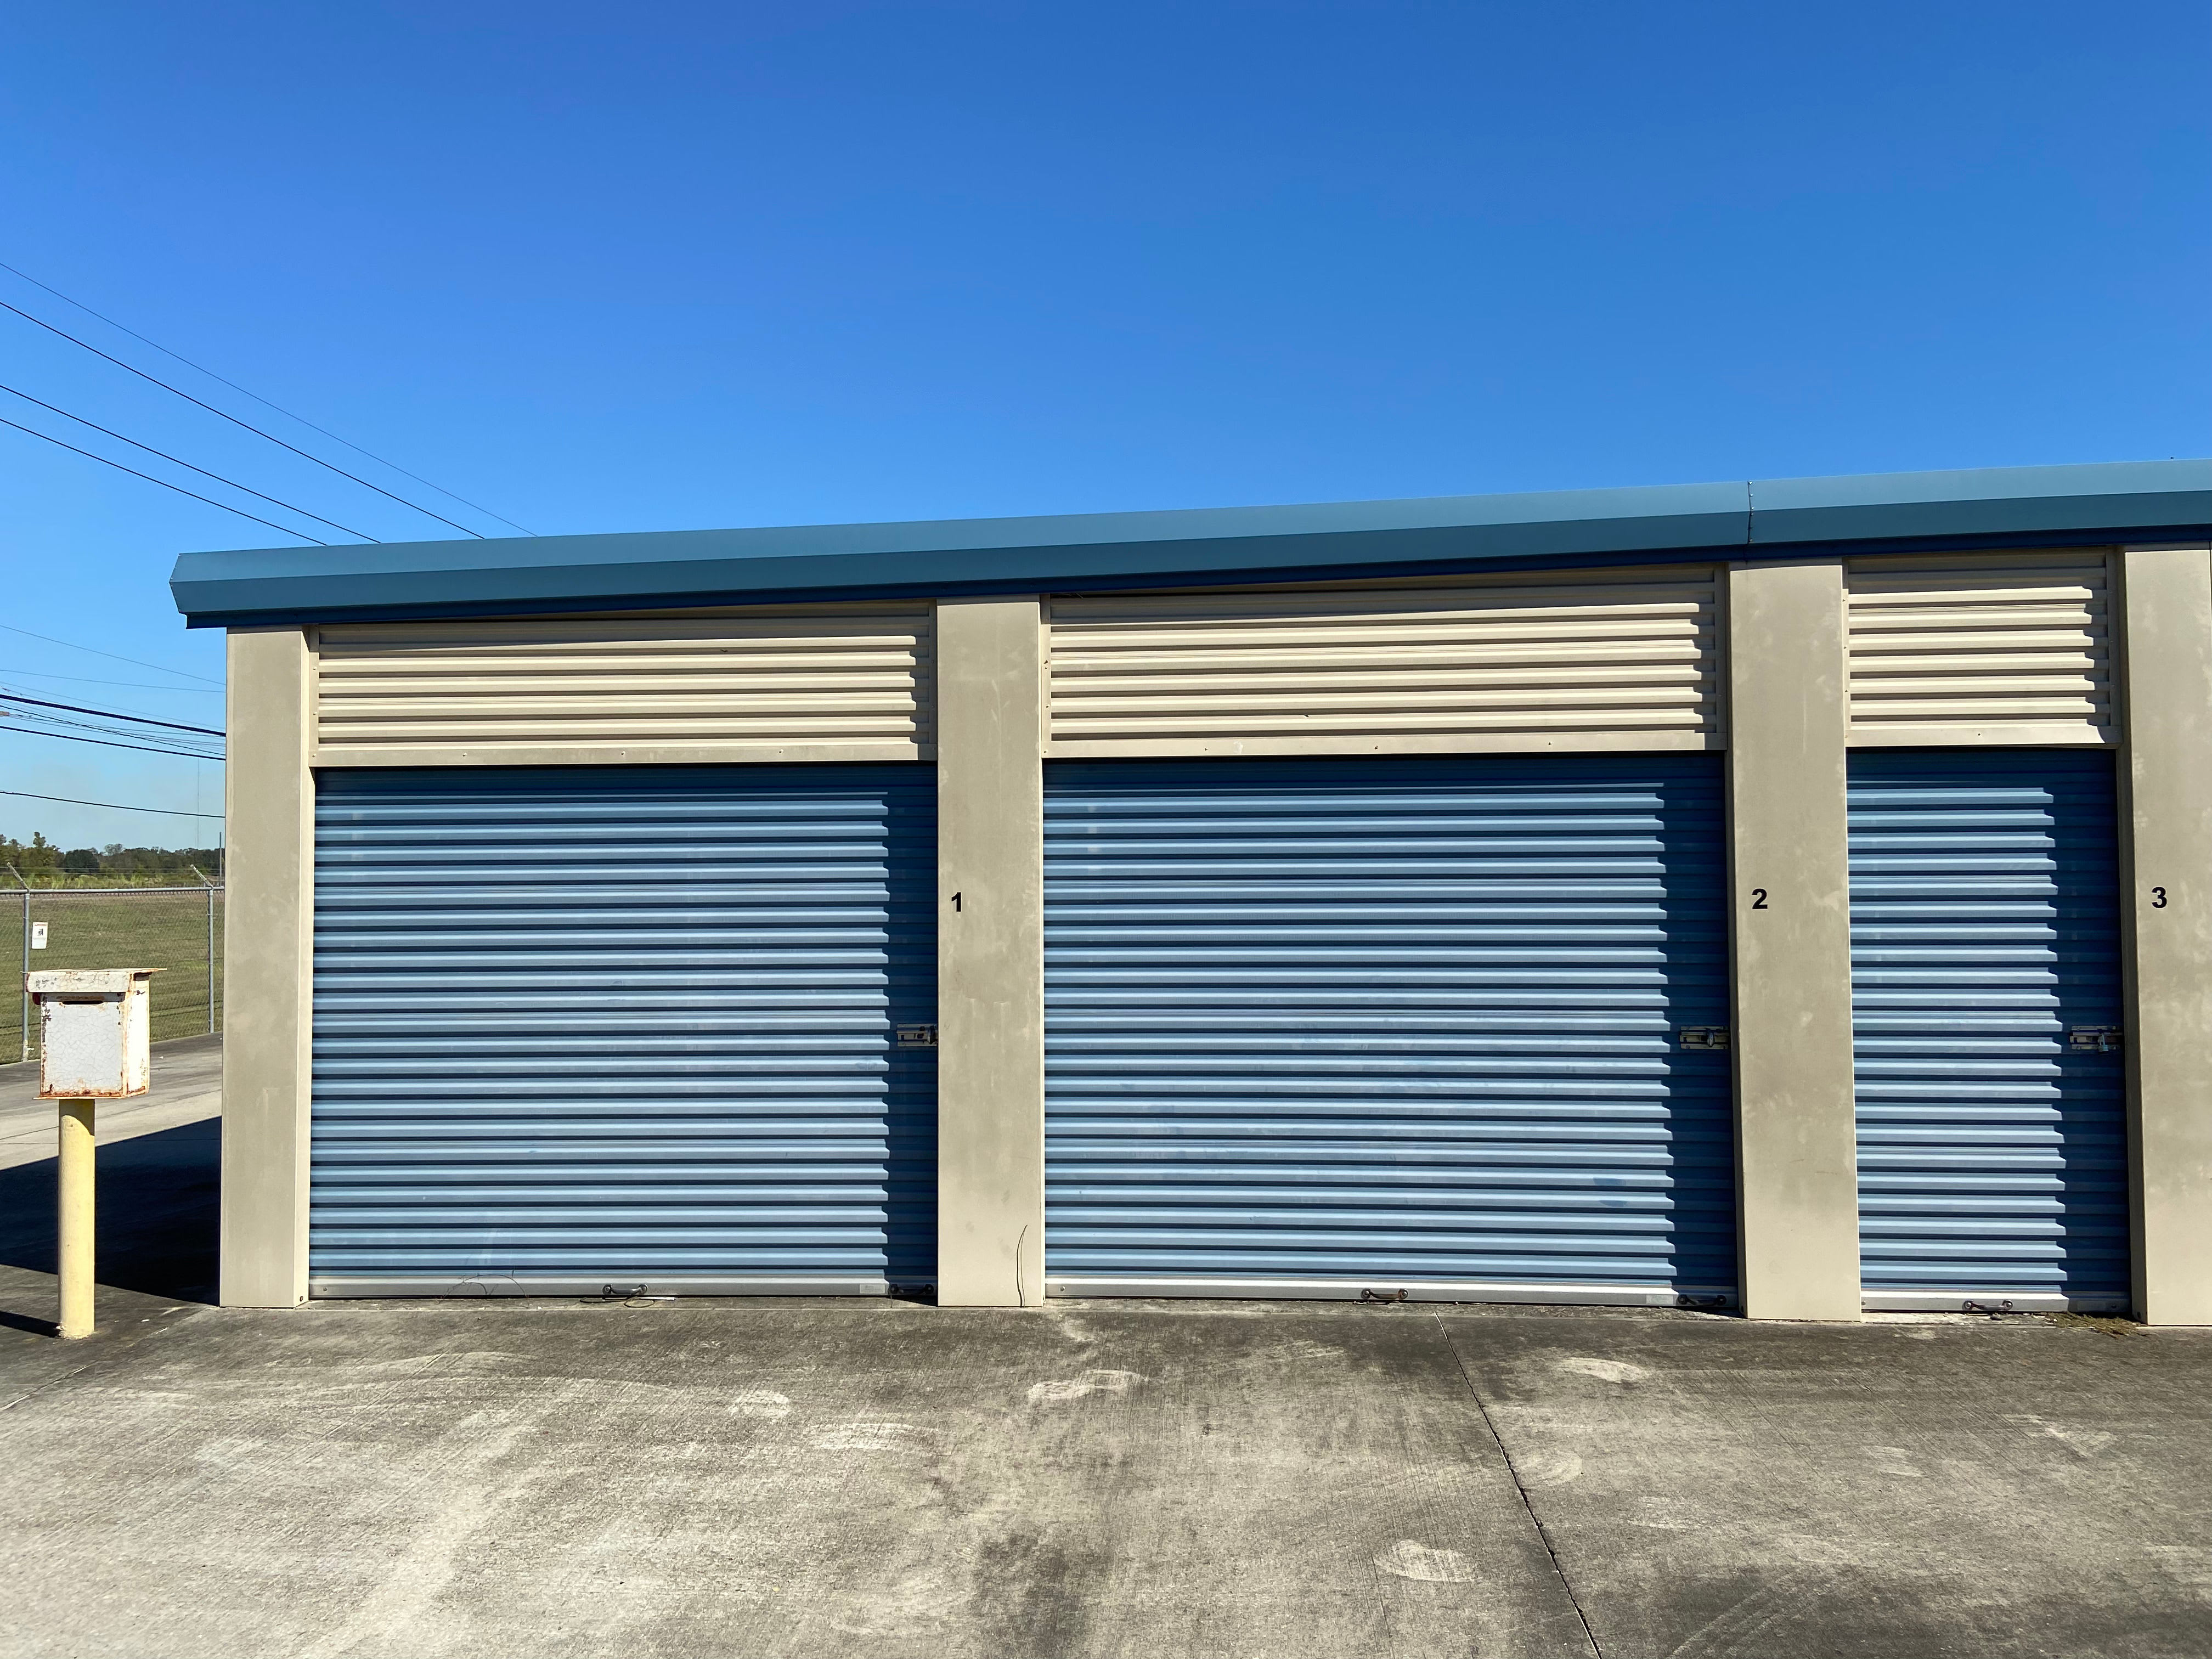 Learn more about auto storage at KO Storage in Port Allen, Louisiana